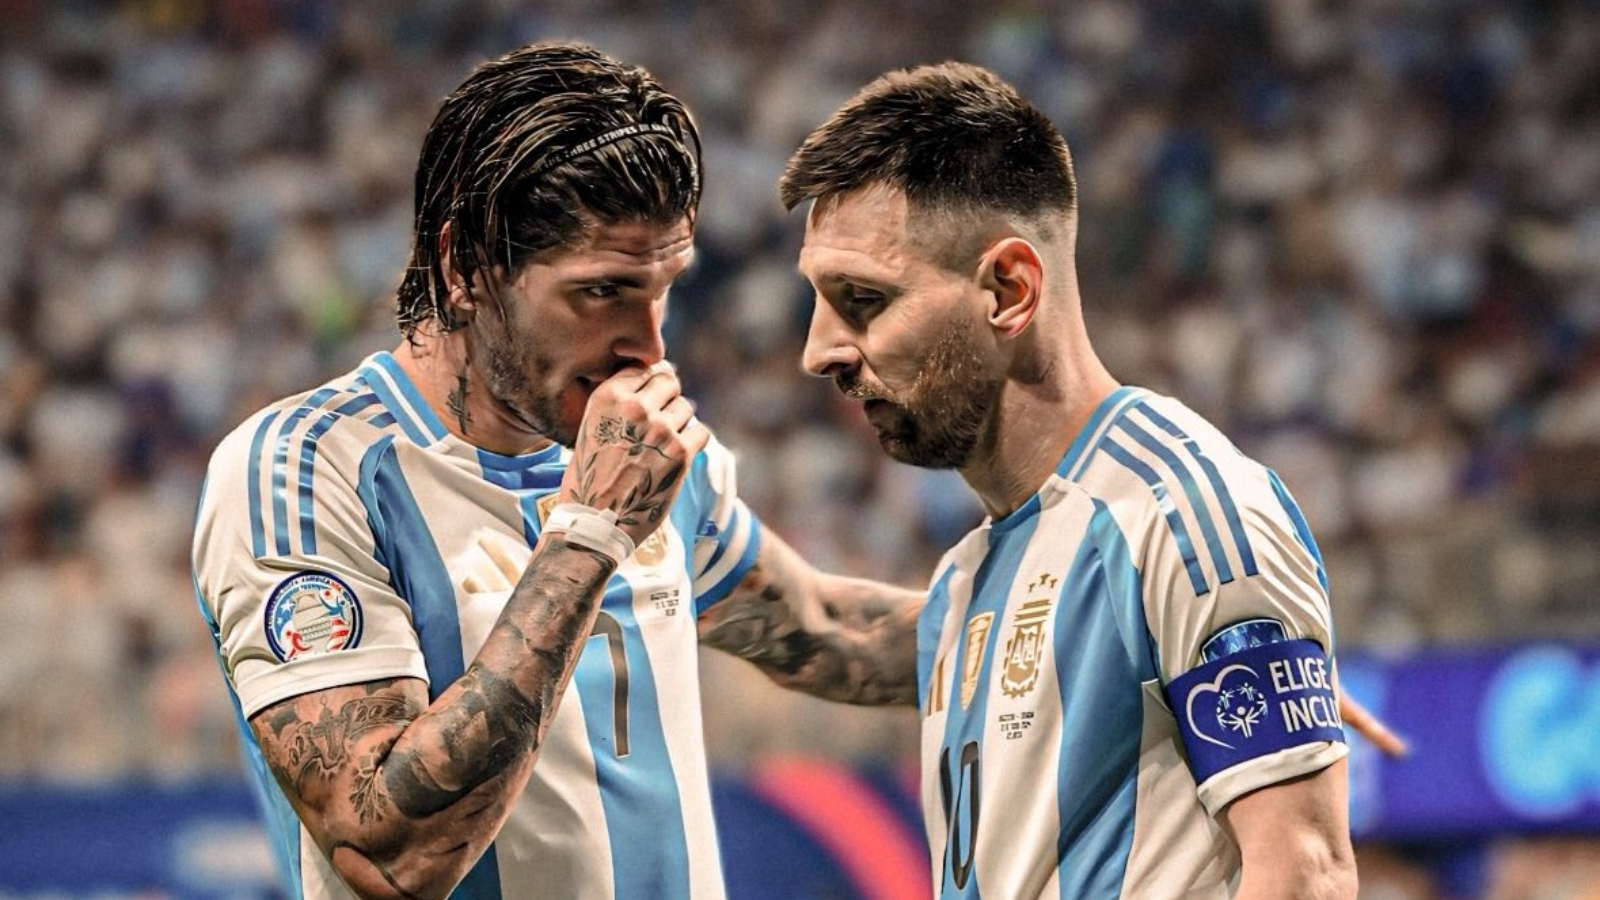 Argentina’s Copa America glory tainted by racism claims: Messi warned teammates to avoid provoking opposition